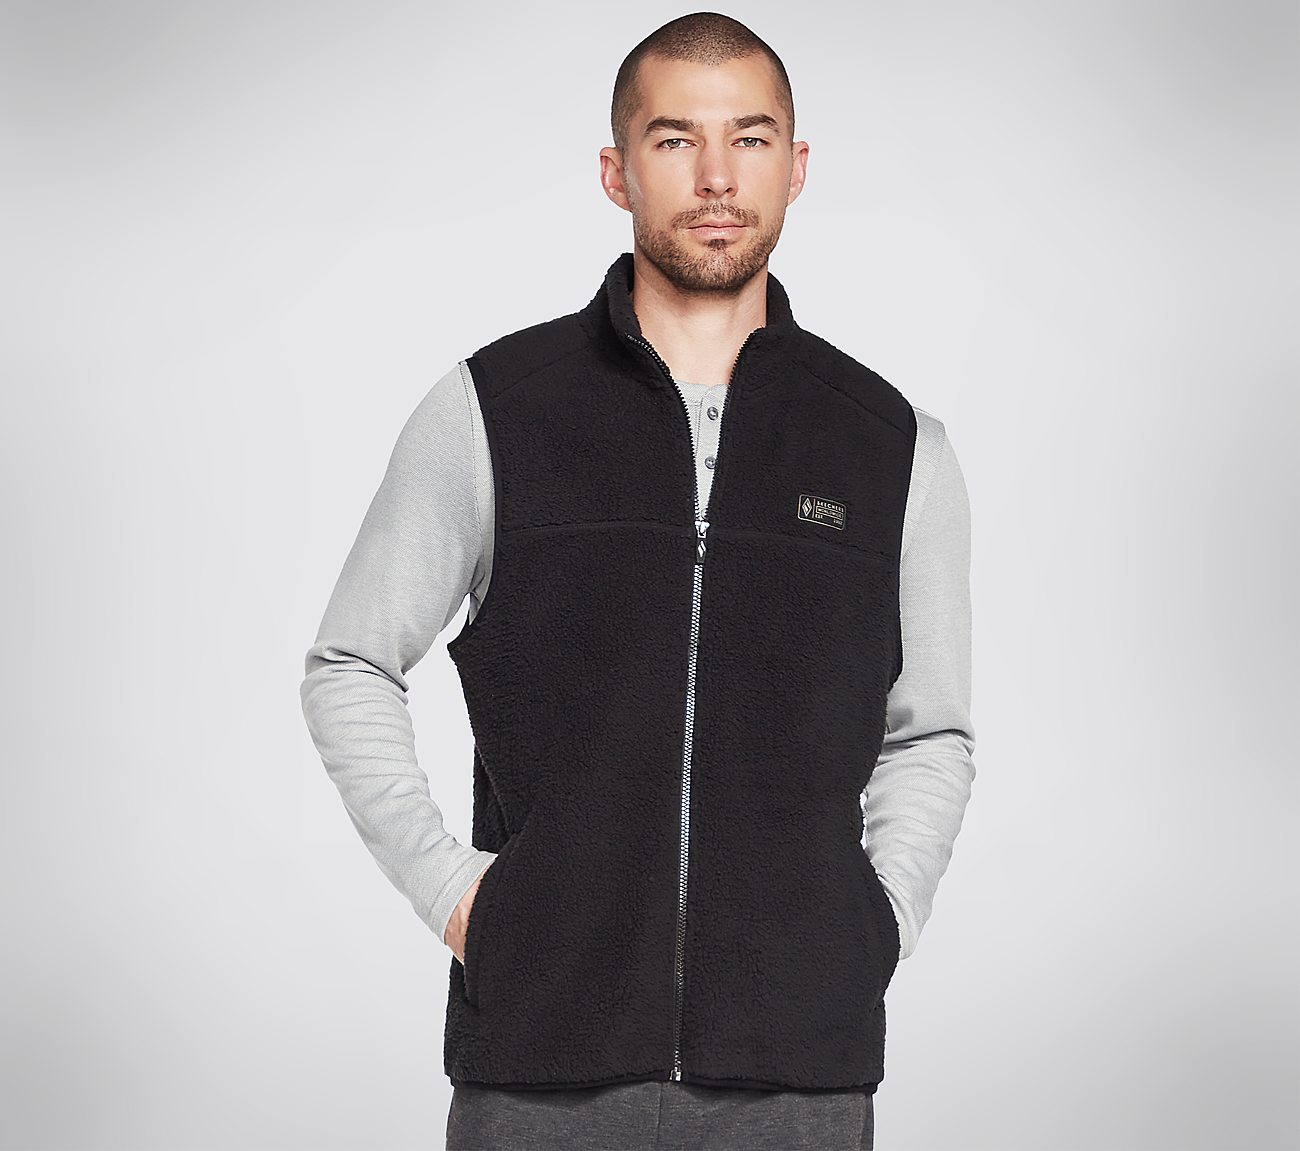 SKECHERS SHERPA VEST, BBBBLACK Apparel Lateral View